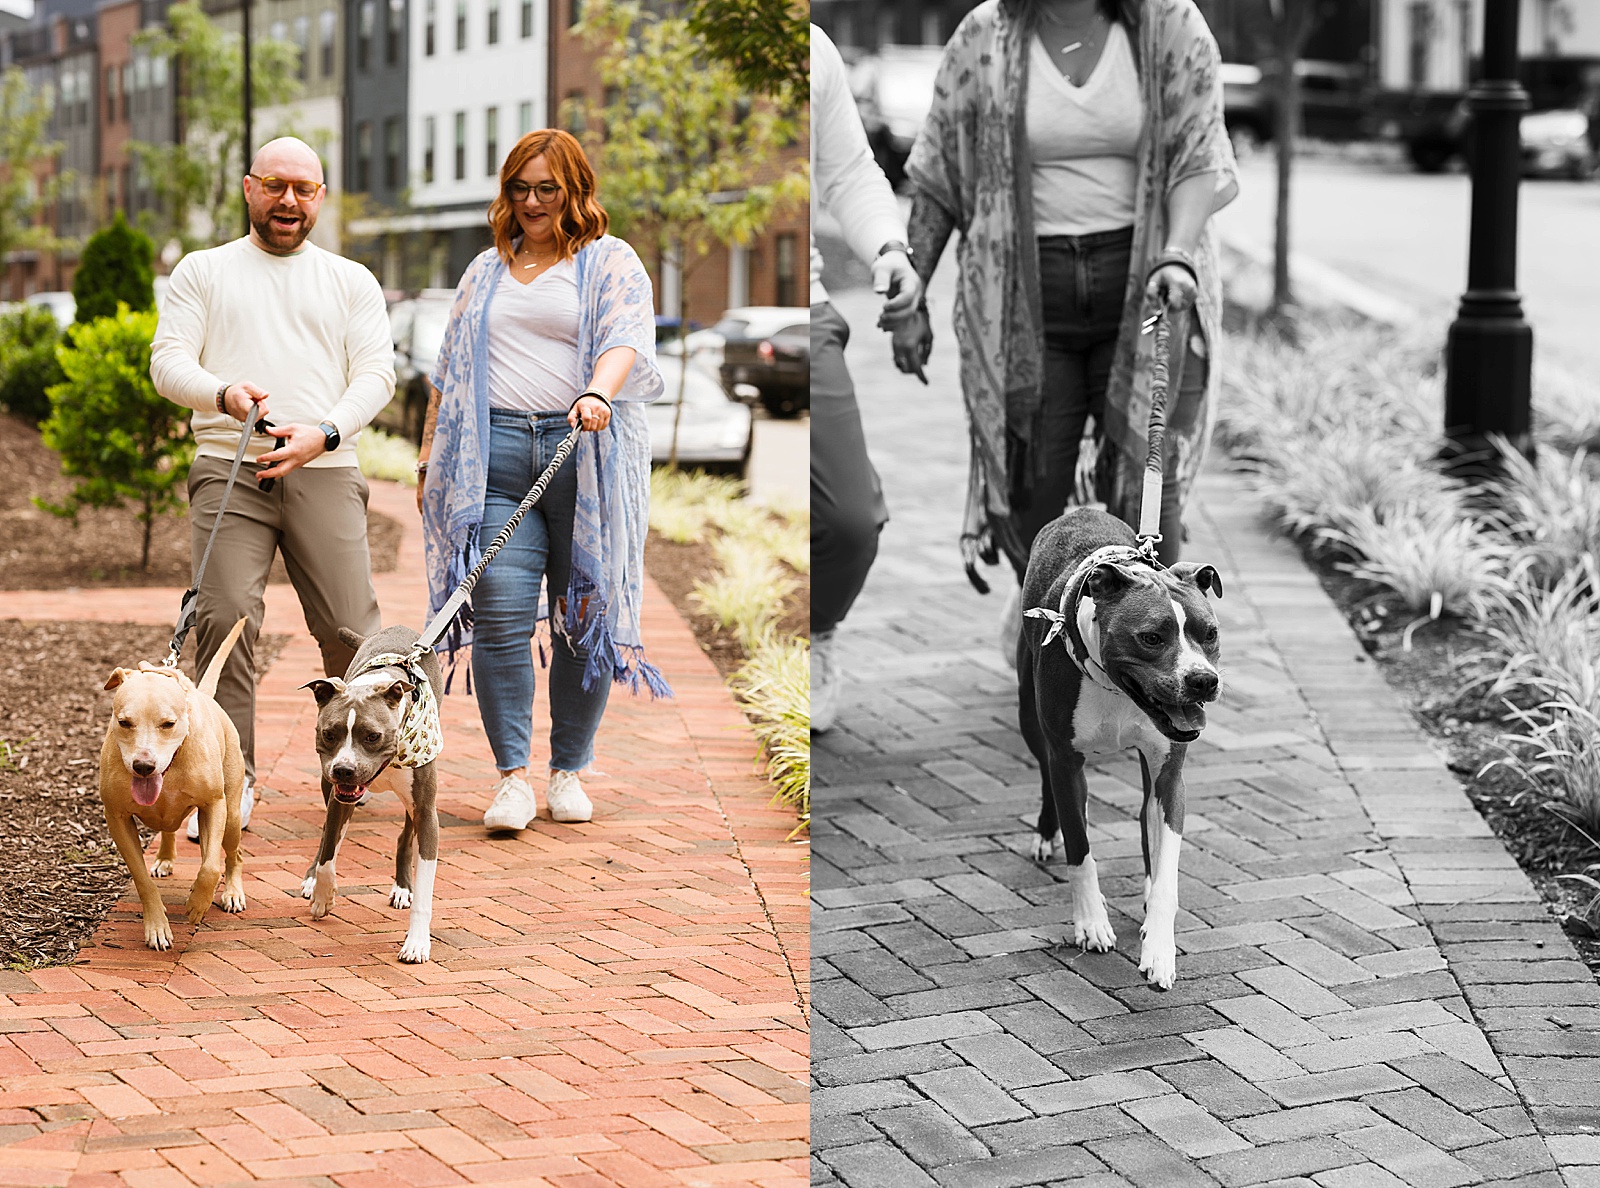 Couple walking their dogs on sidewalk for photo shoot with pups